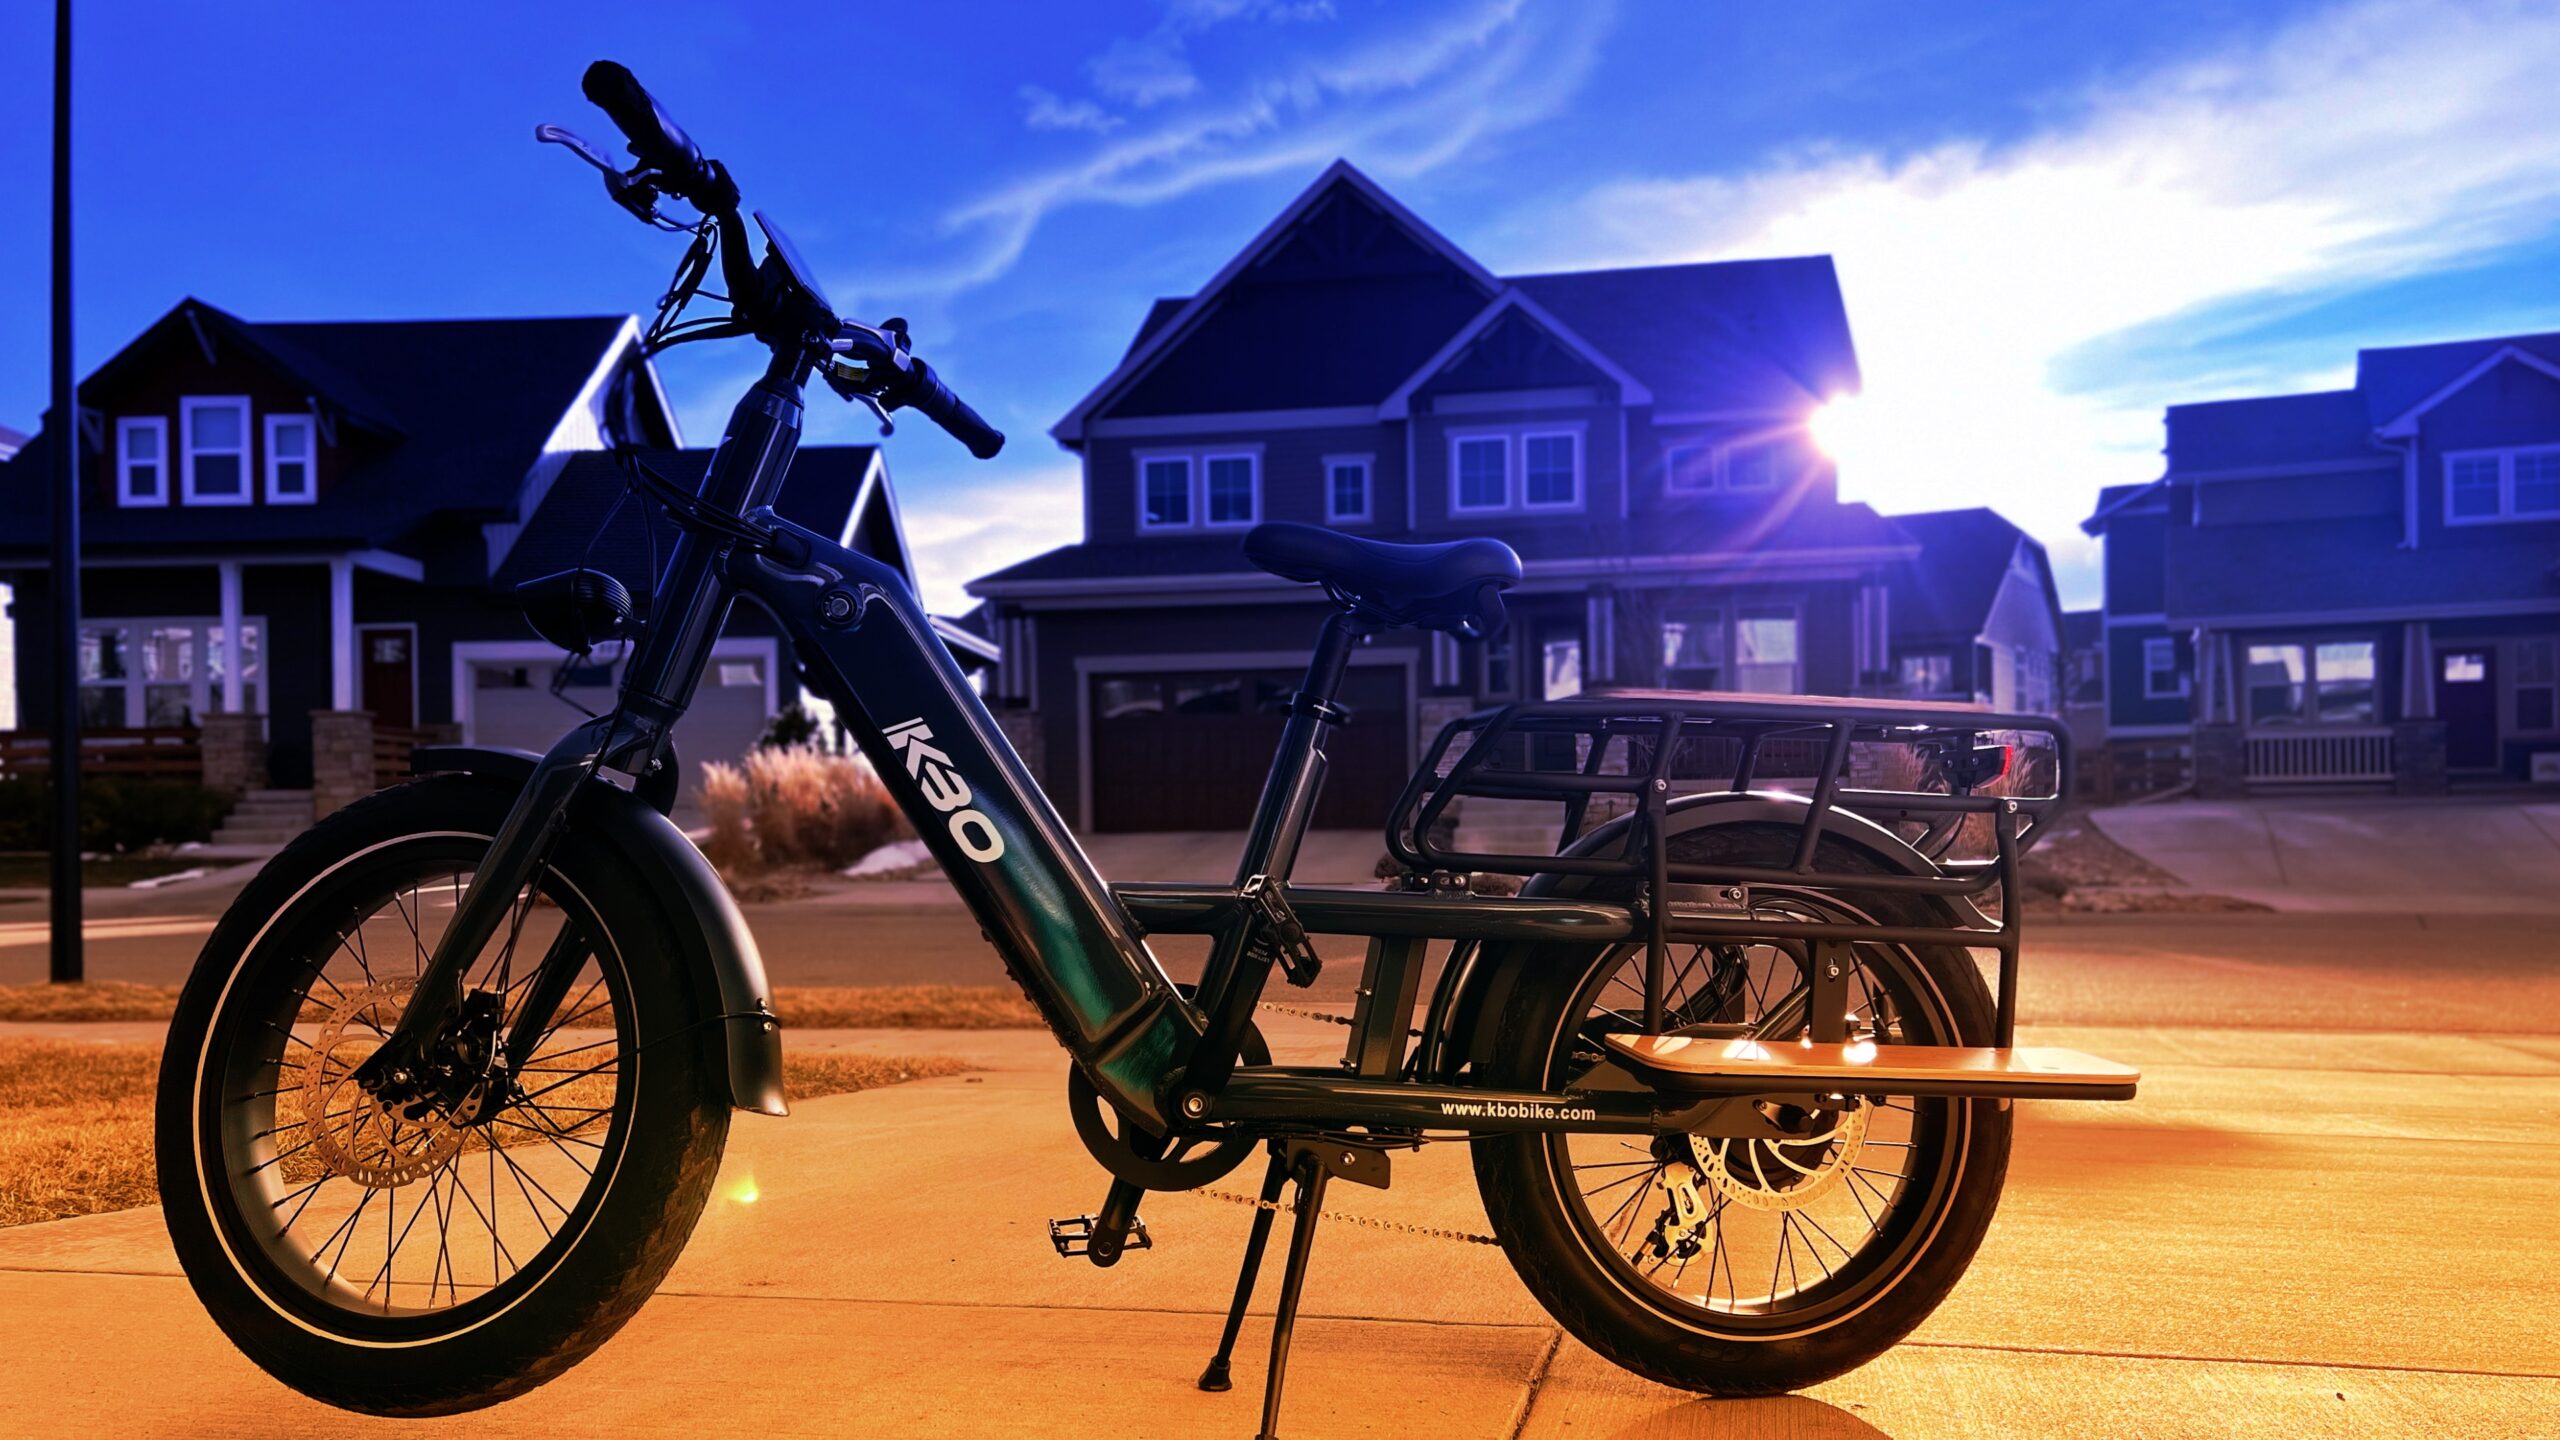 KBO Ranger Review: Why the Ranger Stands Out Among Other Cargo eBikes 2